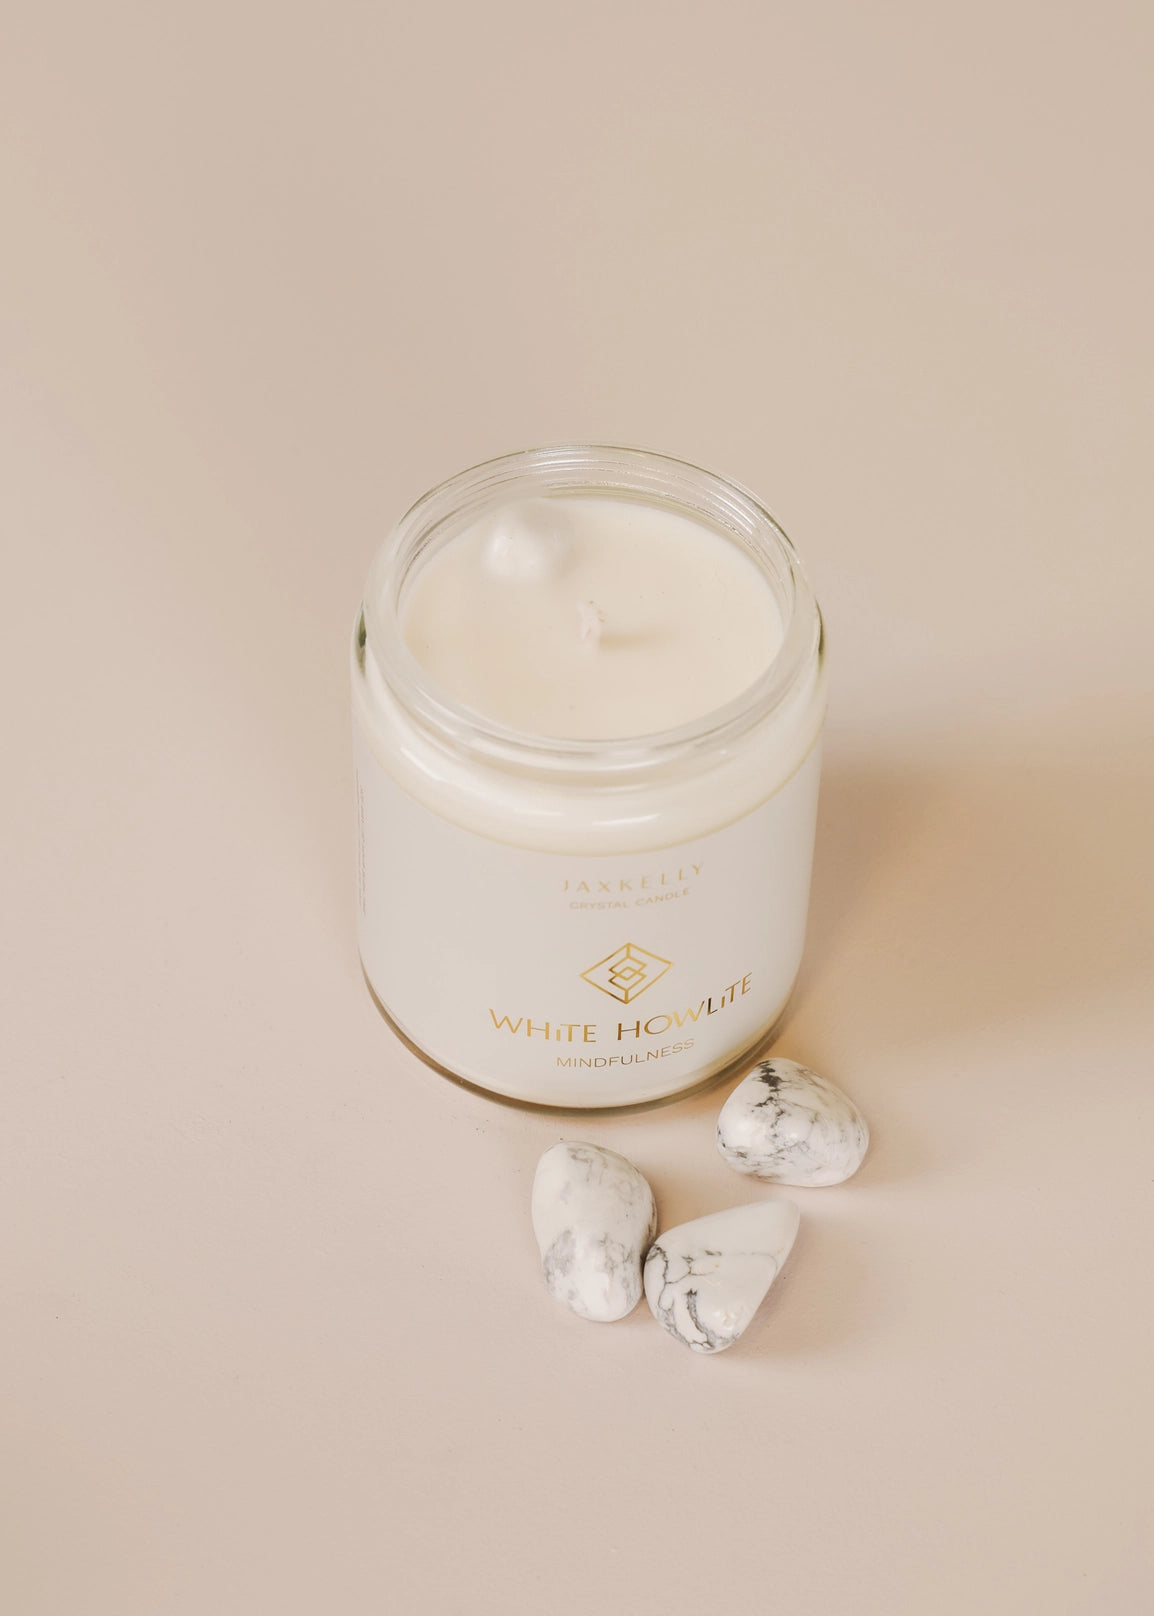 9oz Clear Crystal Candle - White Howlite - Mindfulness - Moon Room Shop and Wellness